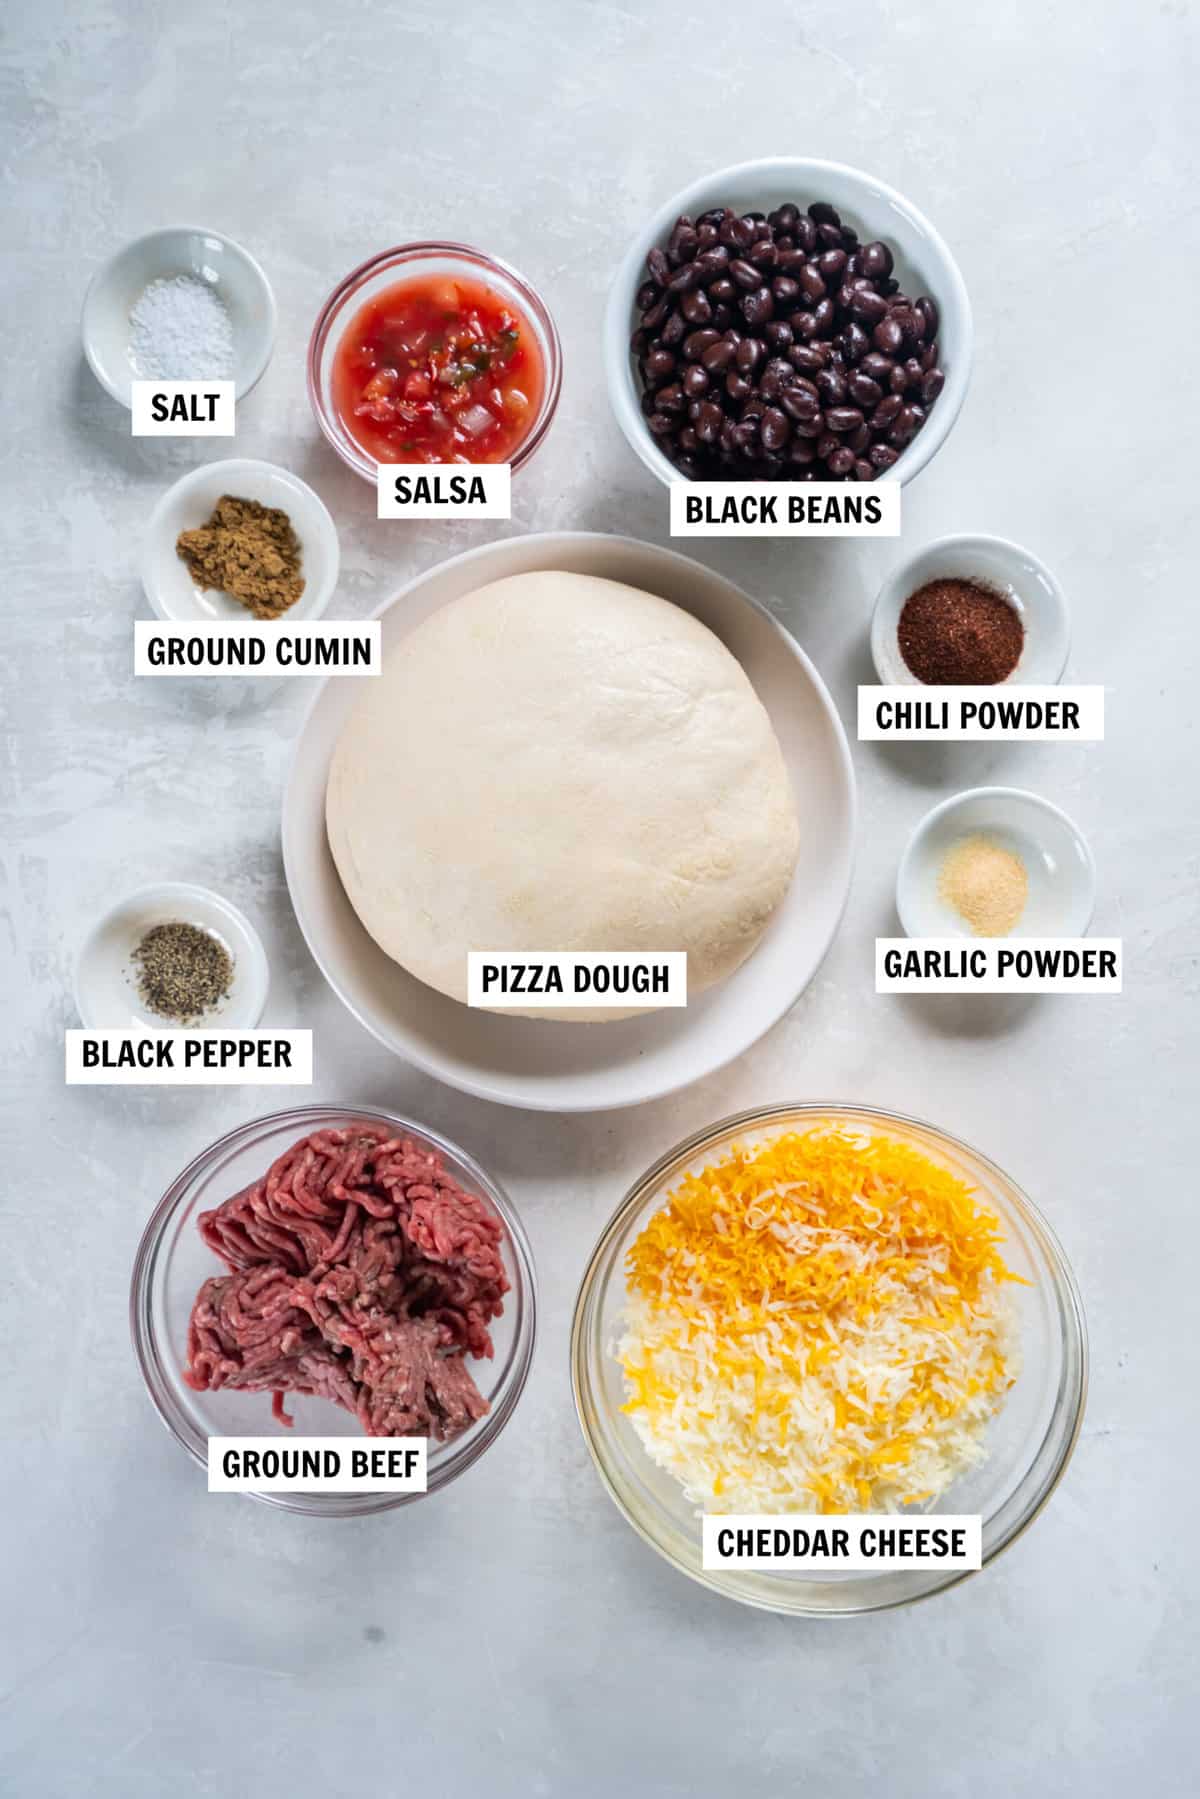 All of the ingredients for taco pizza on a white countertop in bowls including ground beef, chili powder, ground cumin, garlic powder, salt and pepper, black beans, salsa, chili powder, ground cumin, pizza dough and cheese.